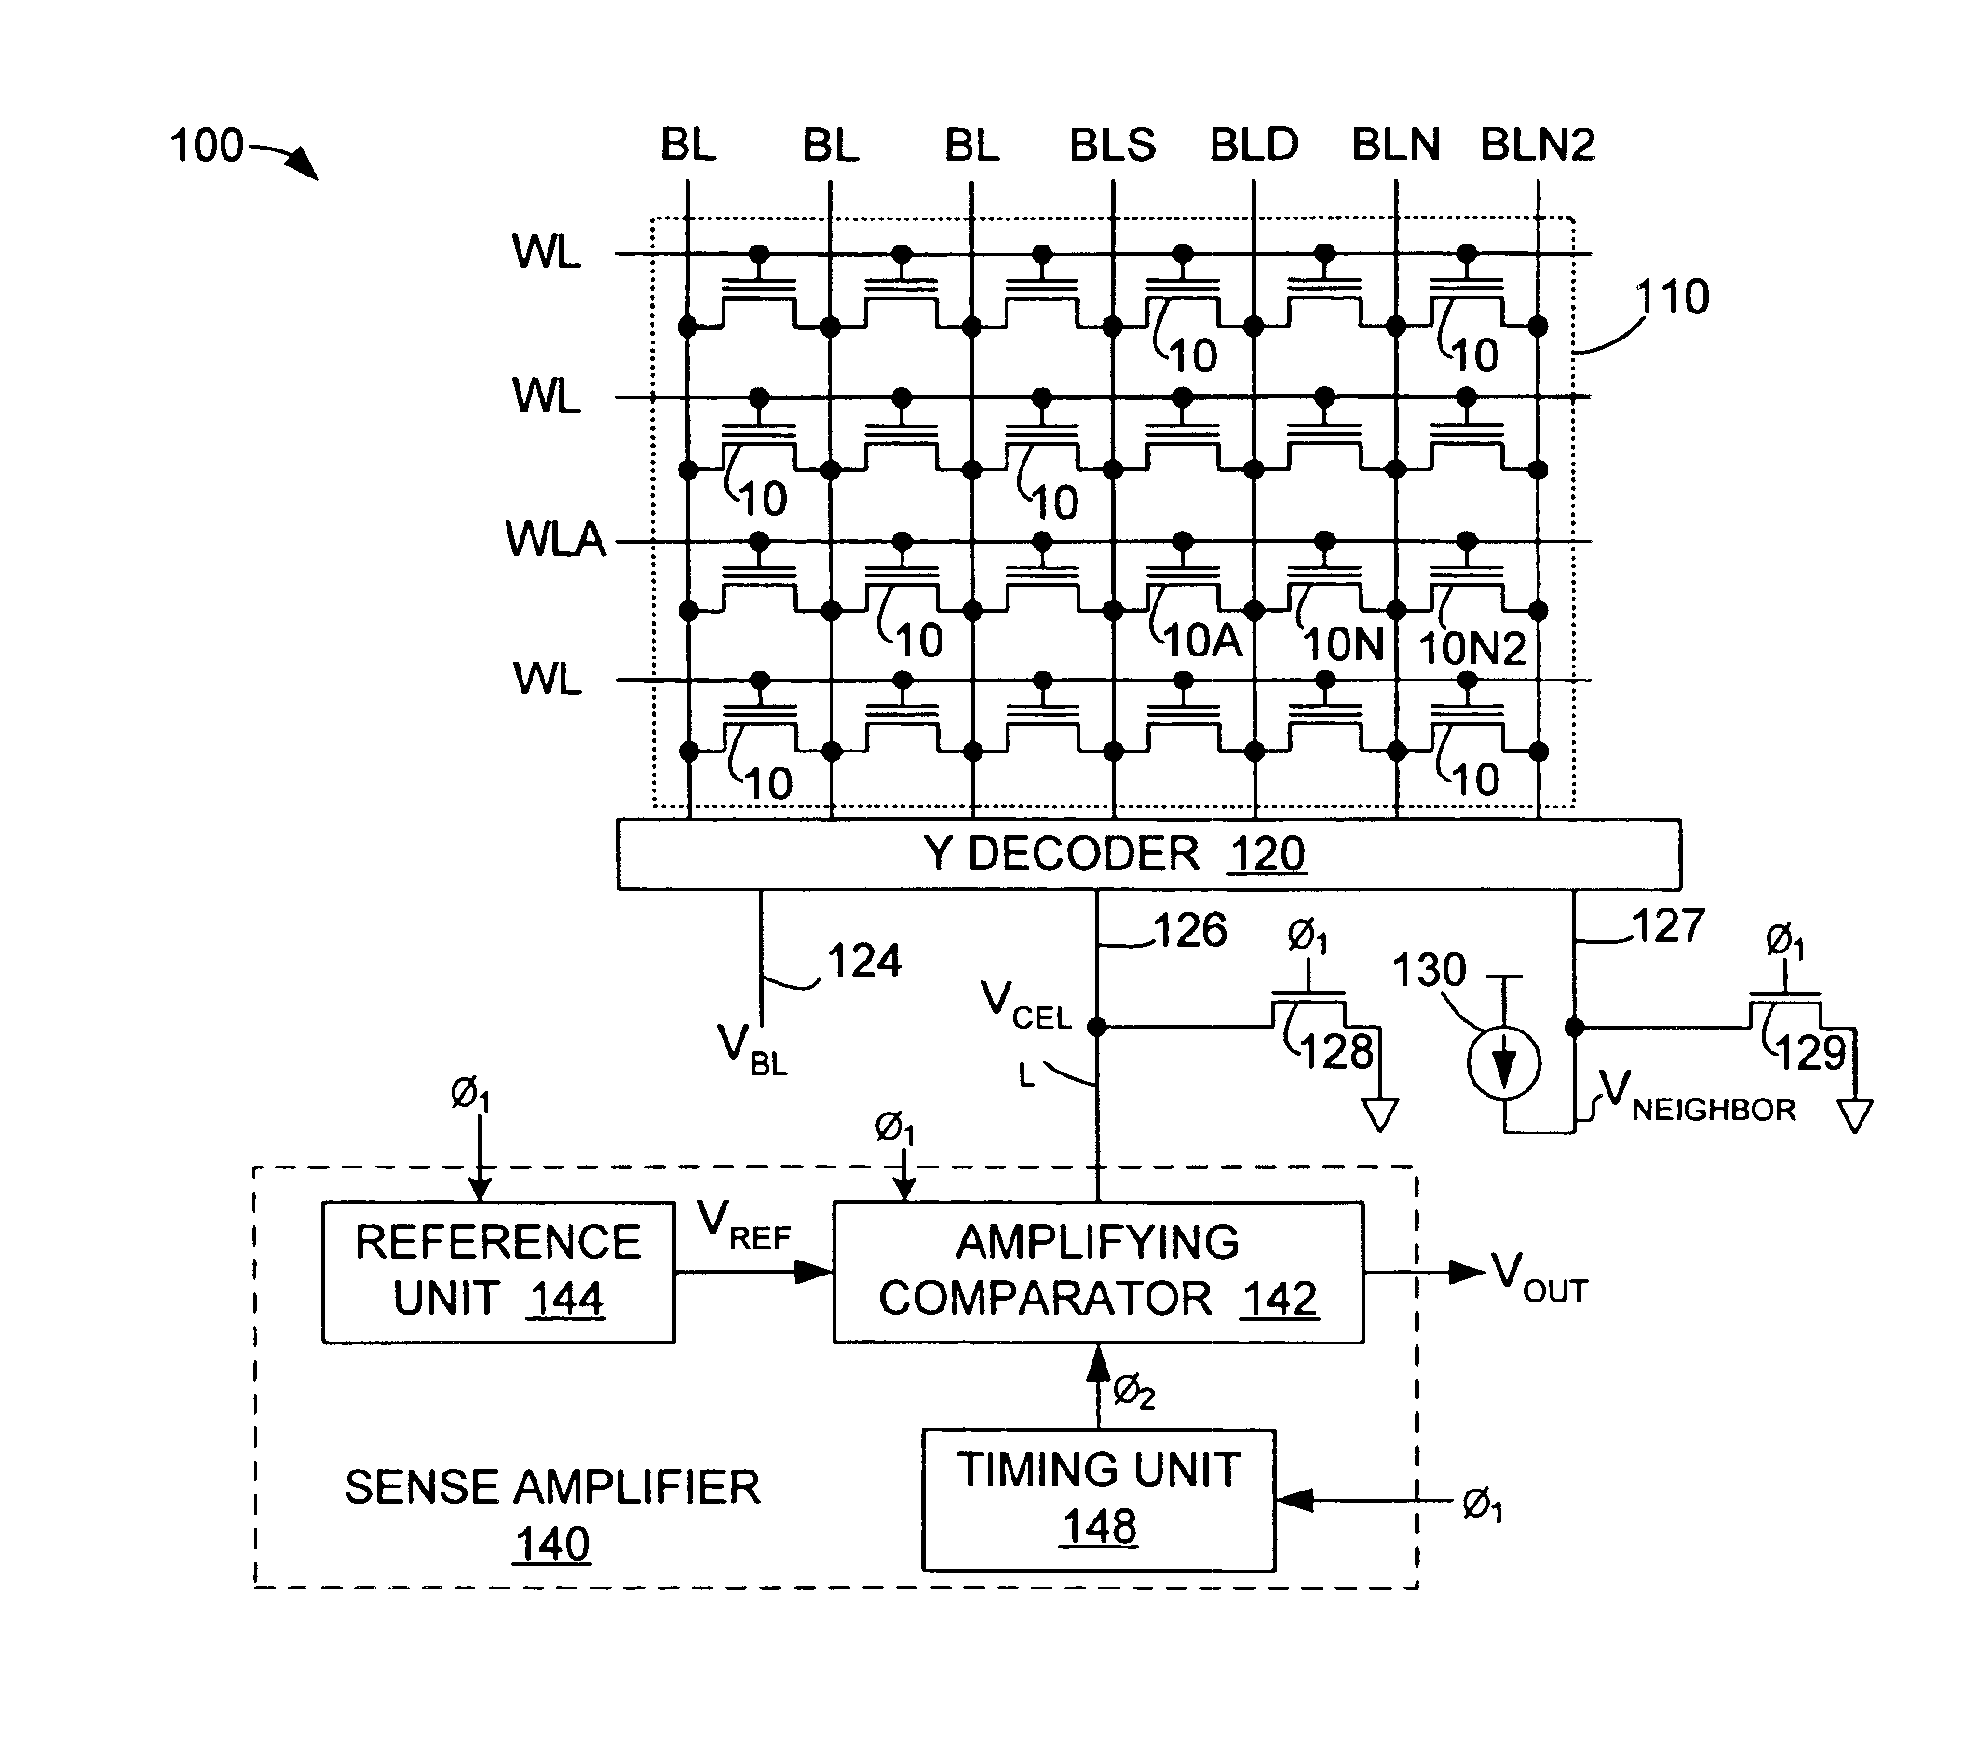 Neighbor effect cancellation in memory array architecture